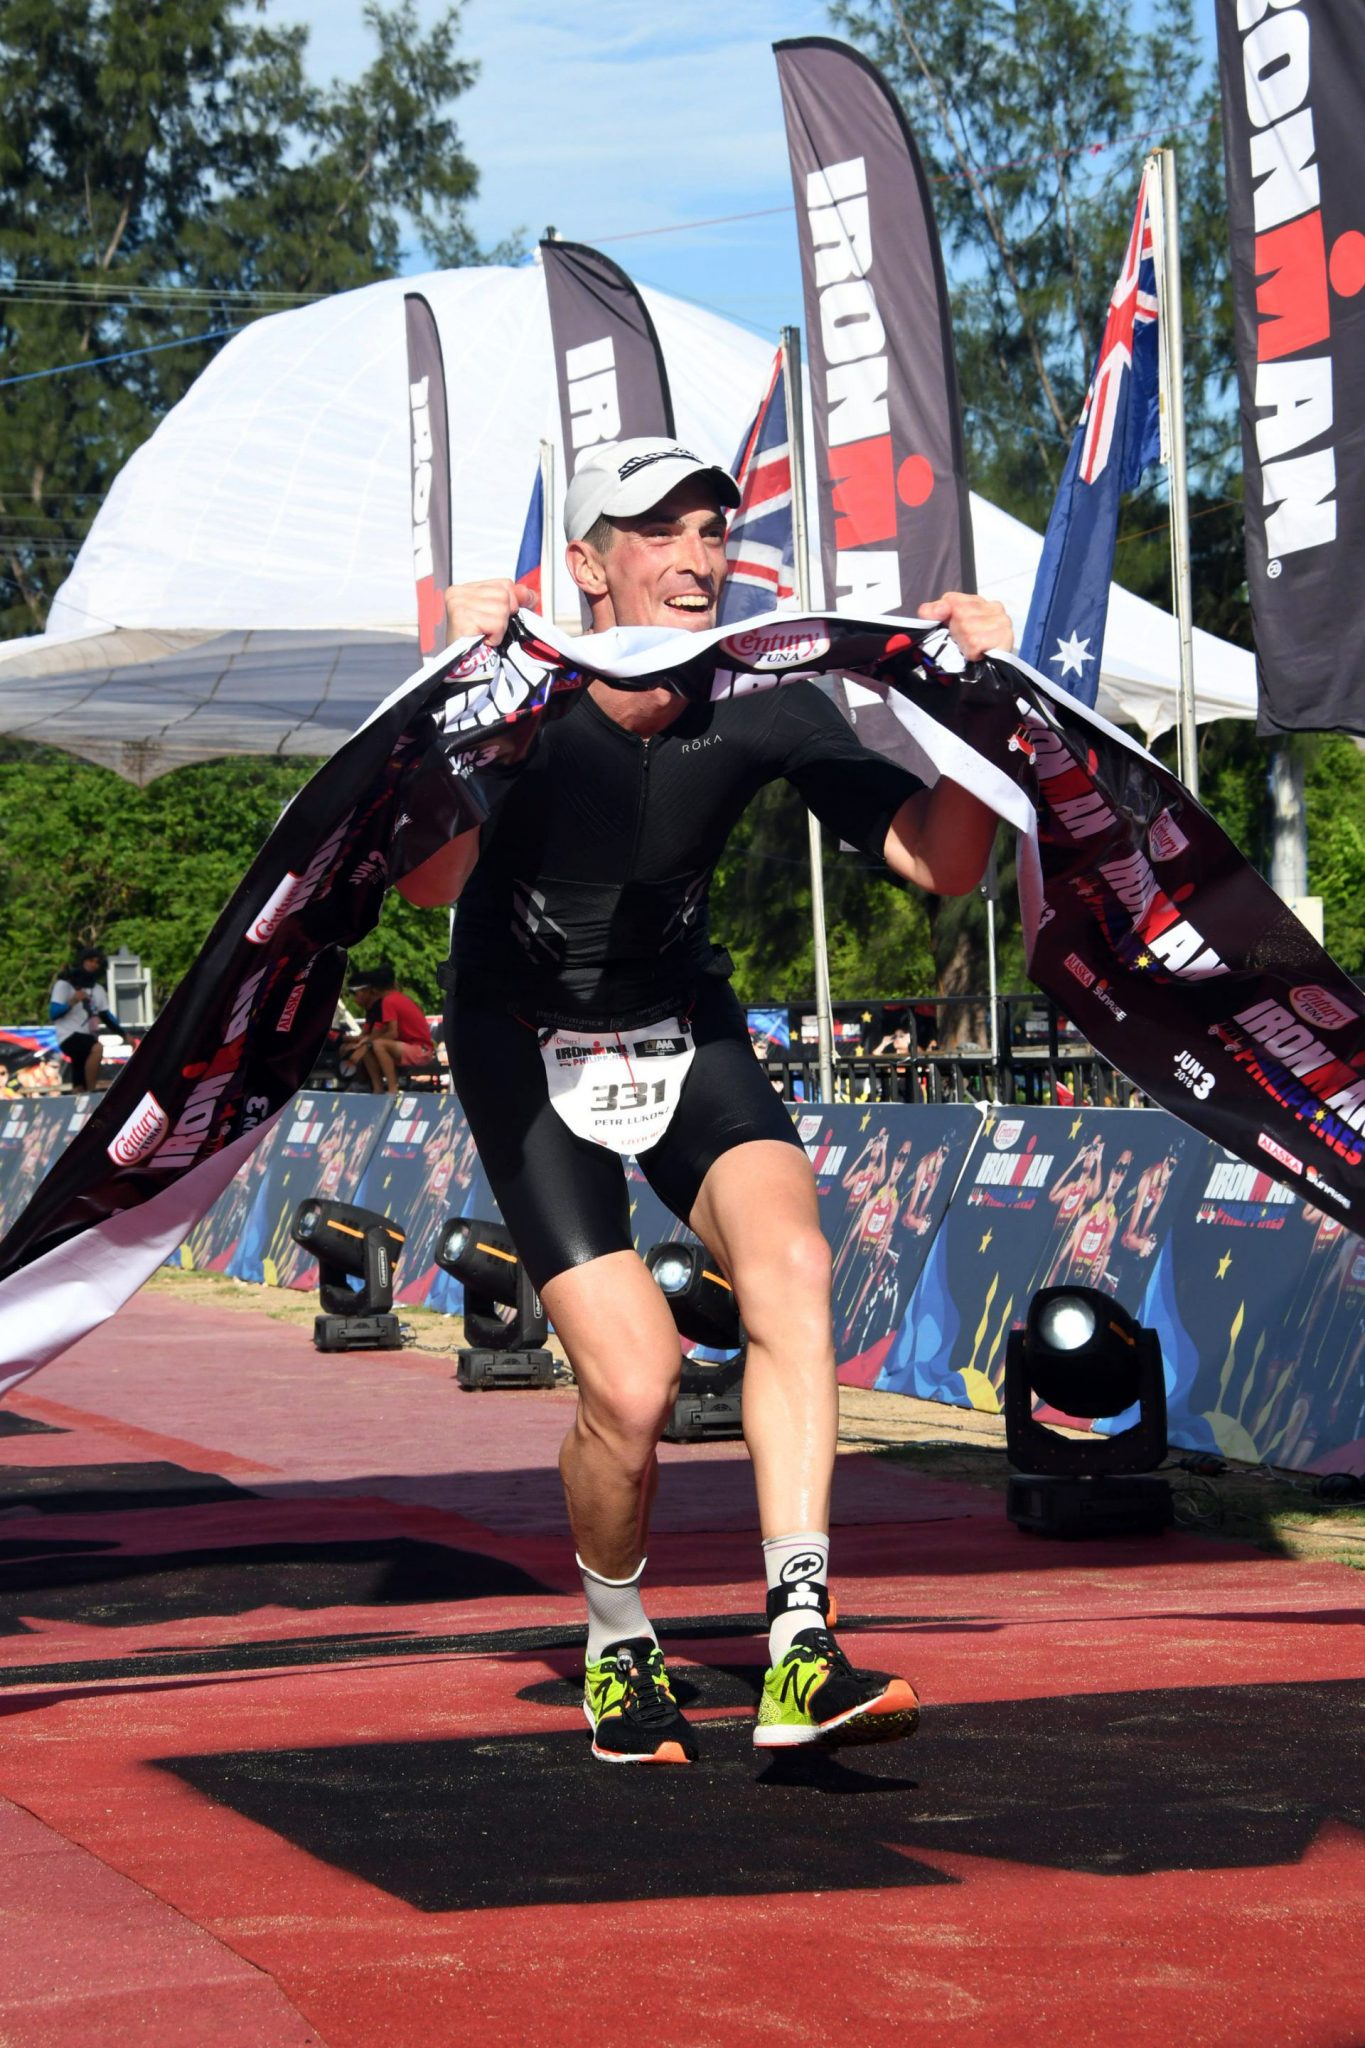 Finish line and tape are magic pain killers. This was simply the best Ironman Petr Lukosz ever did